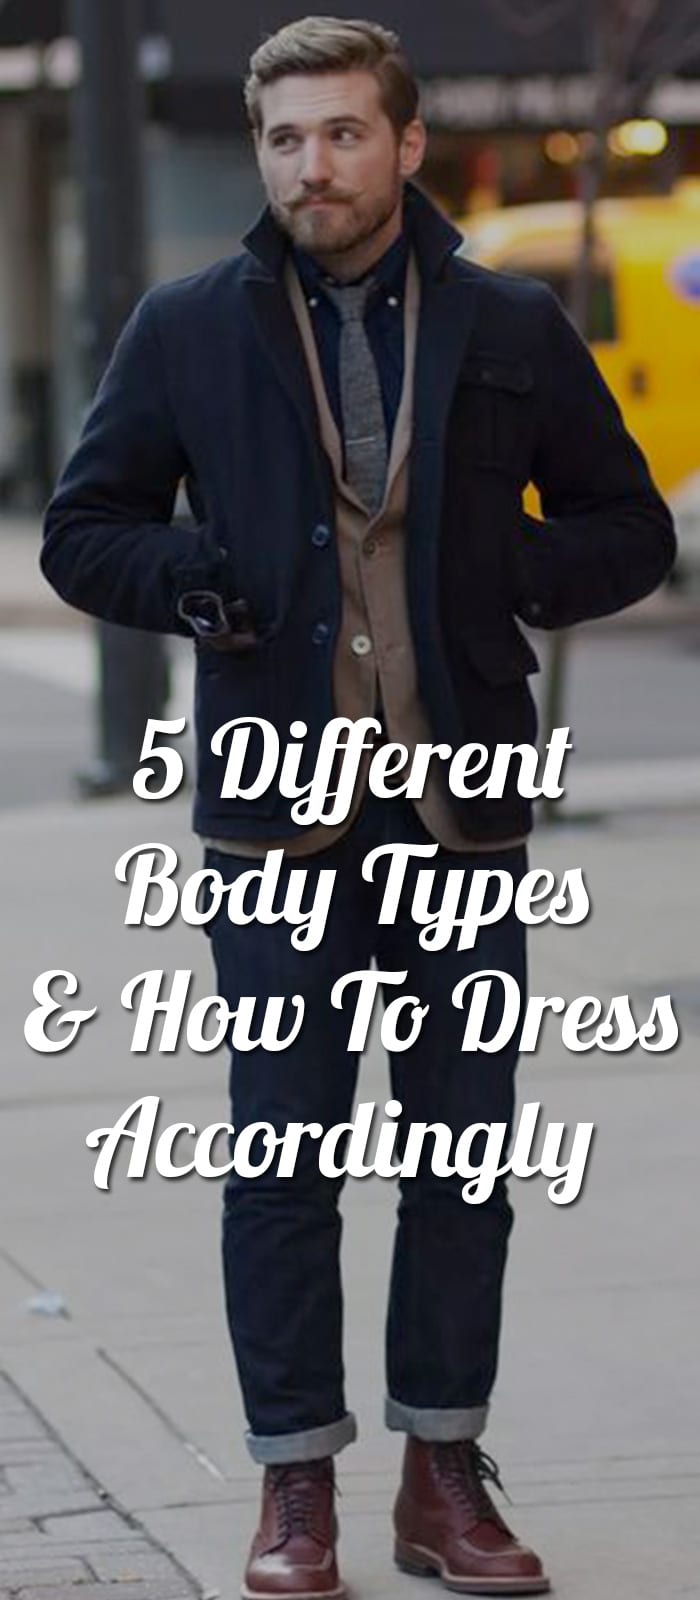 5-Different-Body-Types-&-How-To-Dress-Accordingly-.